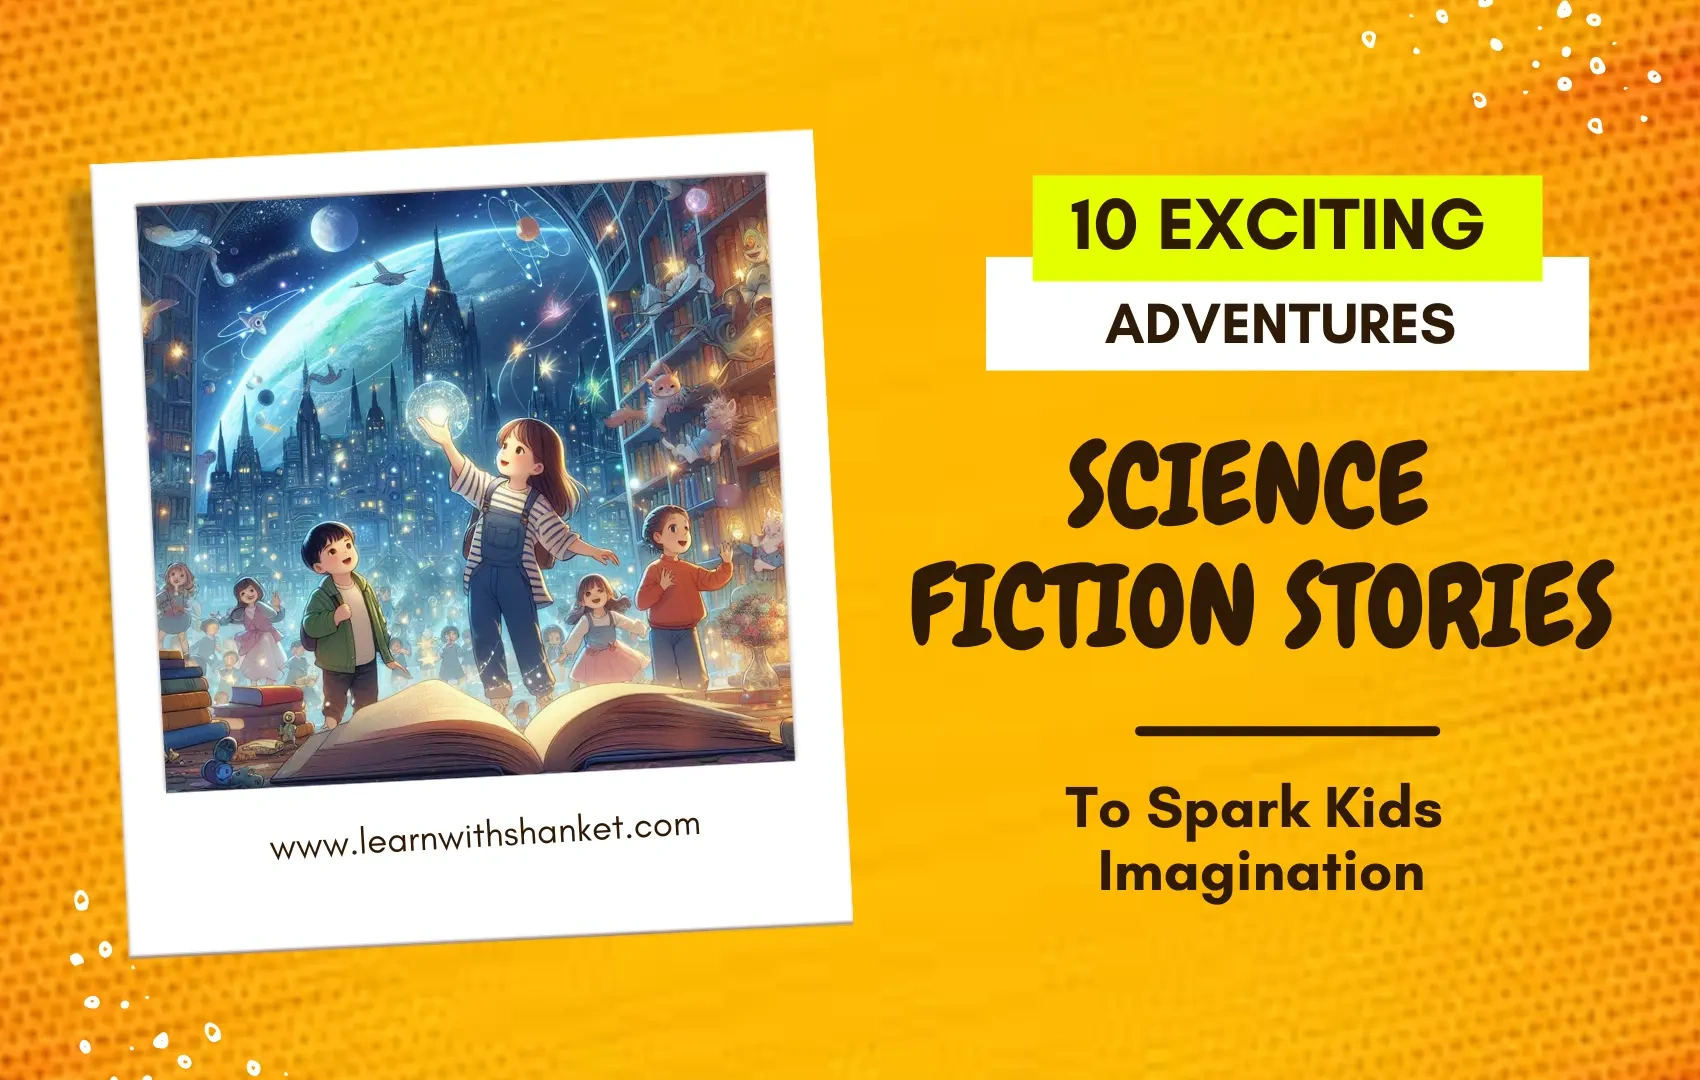 Thumbnail for Science Fiction Stories for Kids: 10 Exciting Adventures to Spark Their Imagination.